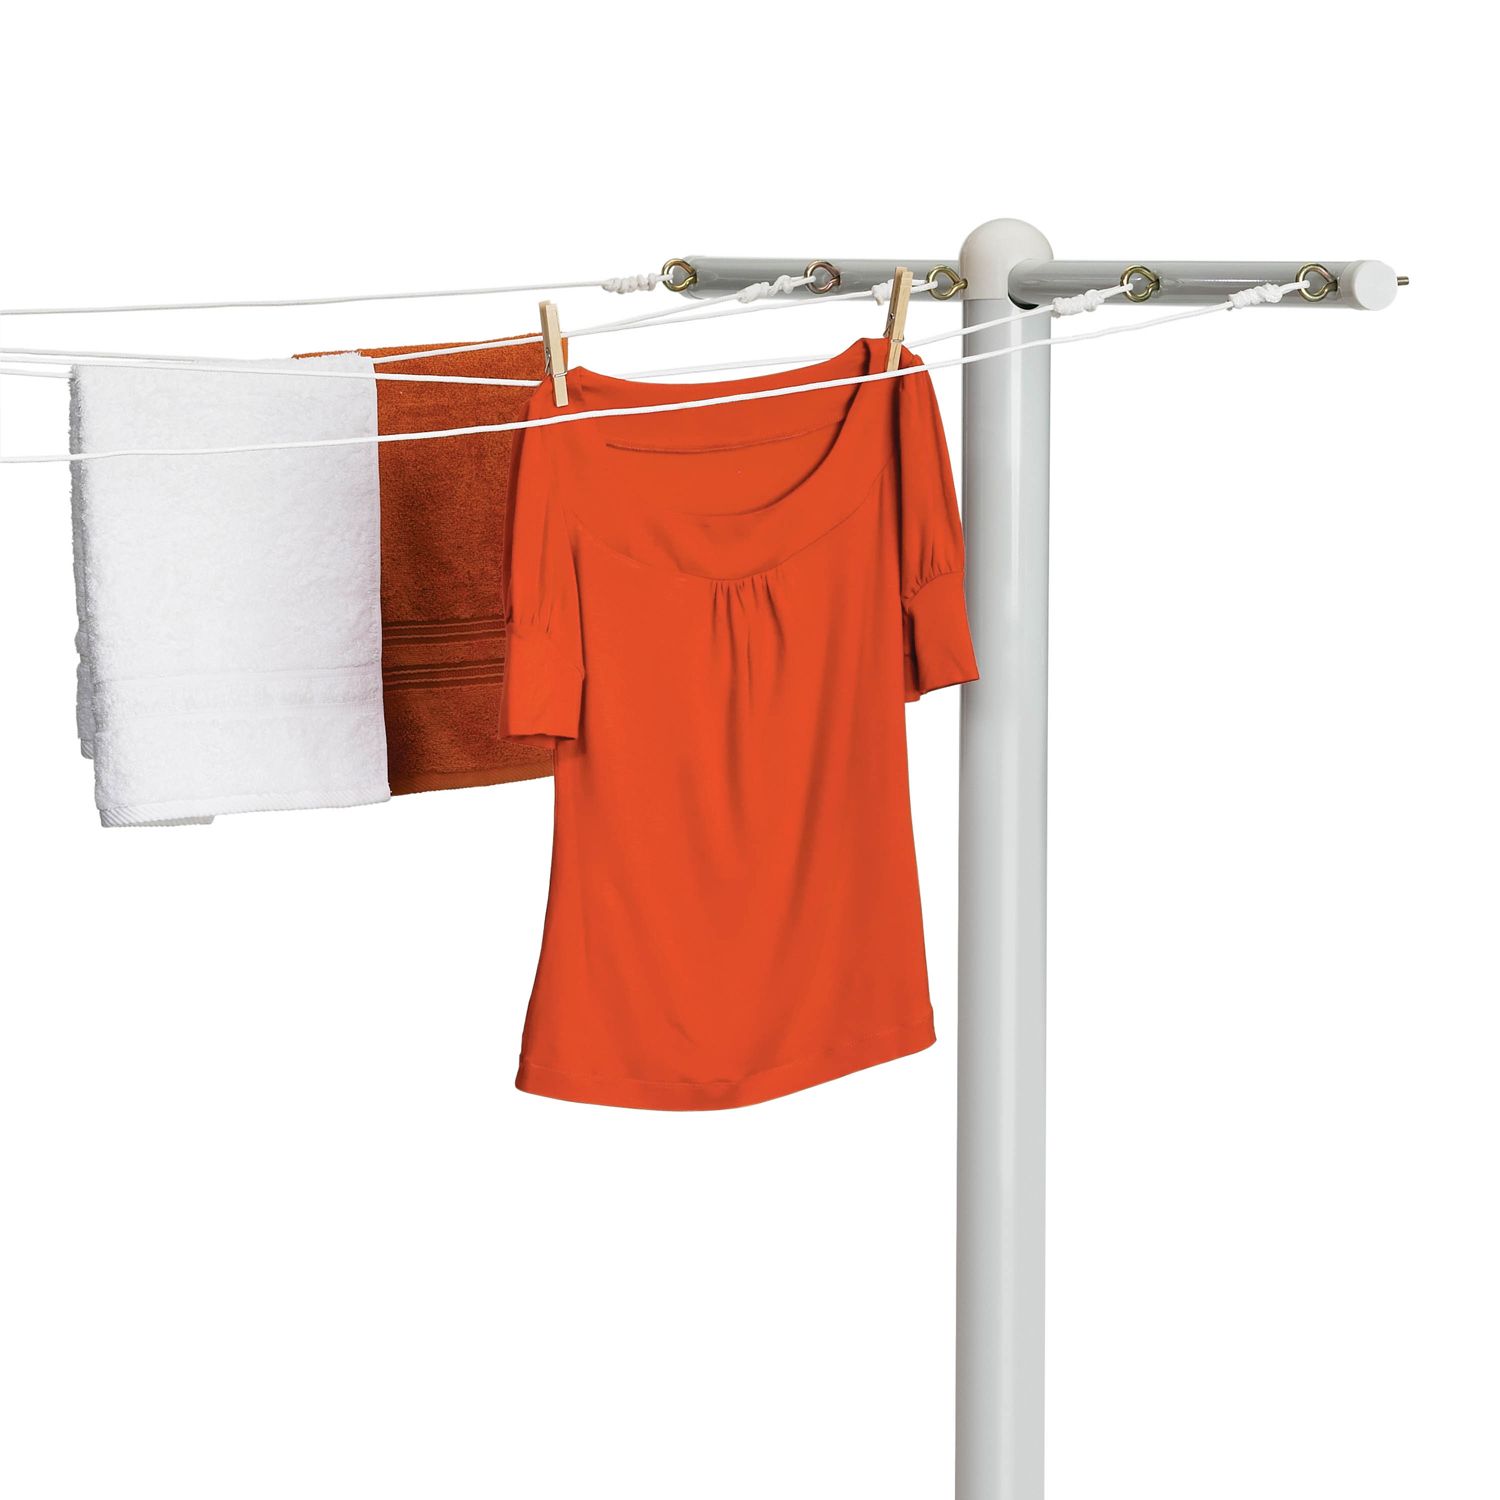 Image for Honey-Can-Do 5 Line T-Post Dryer at Kohl's.